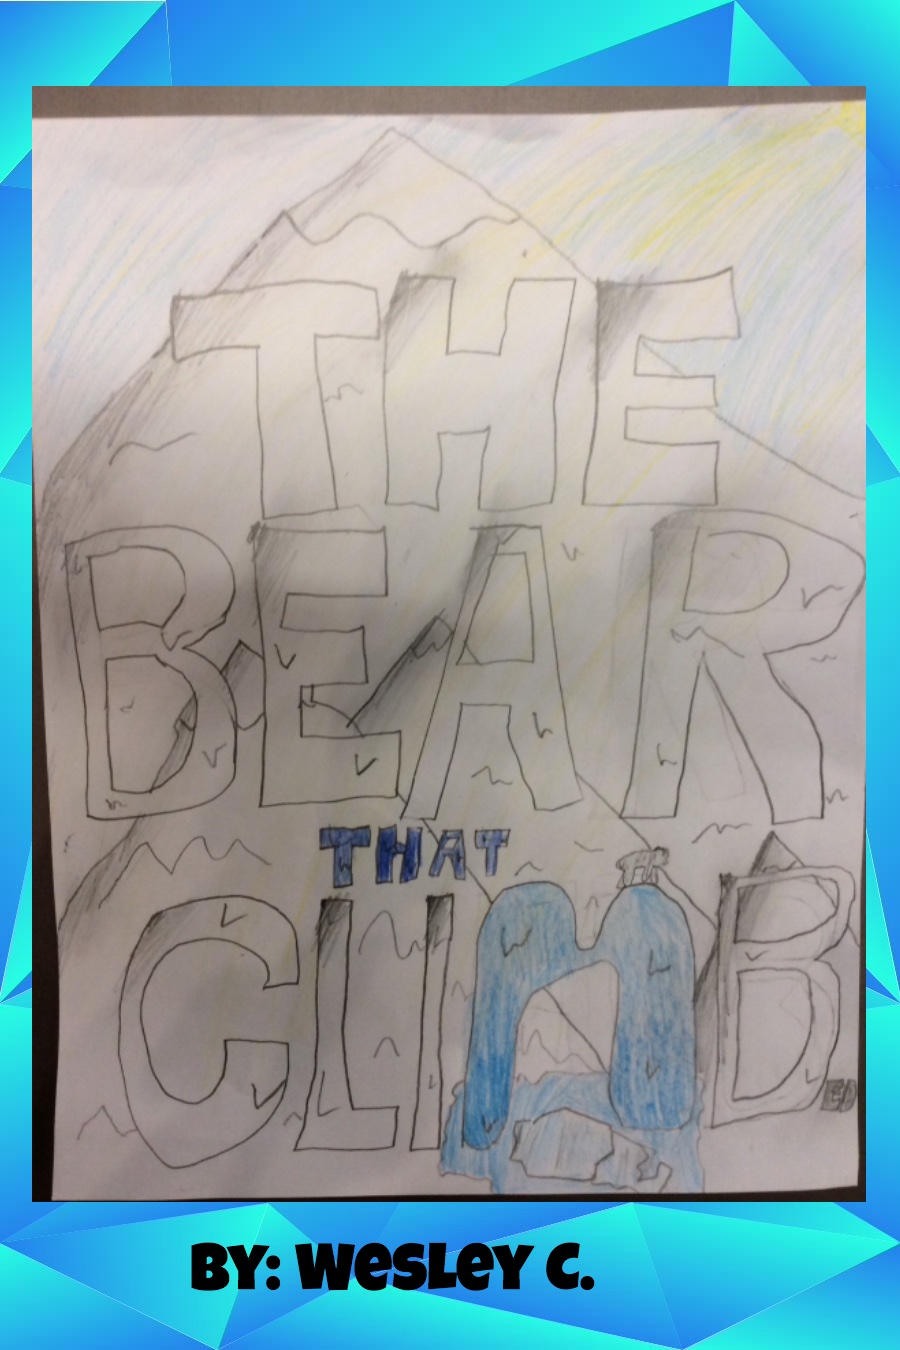 The Bear That Climbed by Wesley C